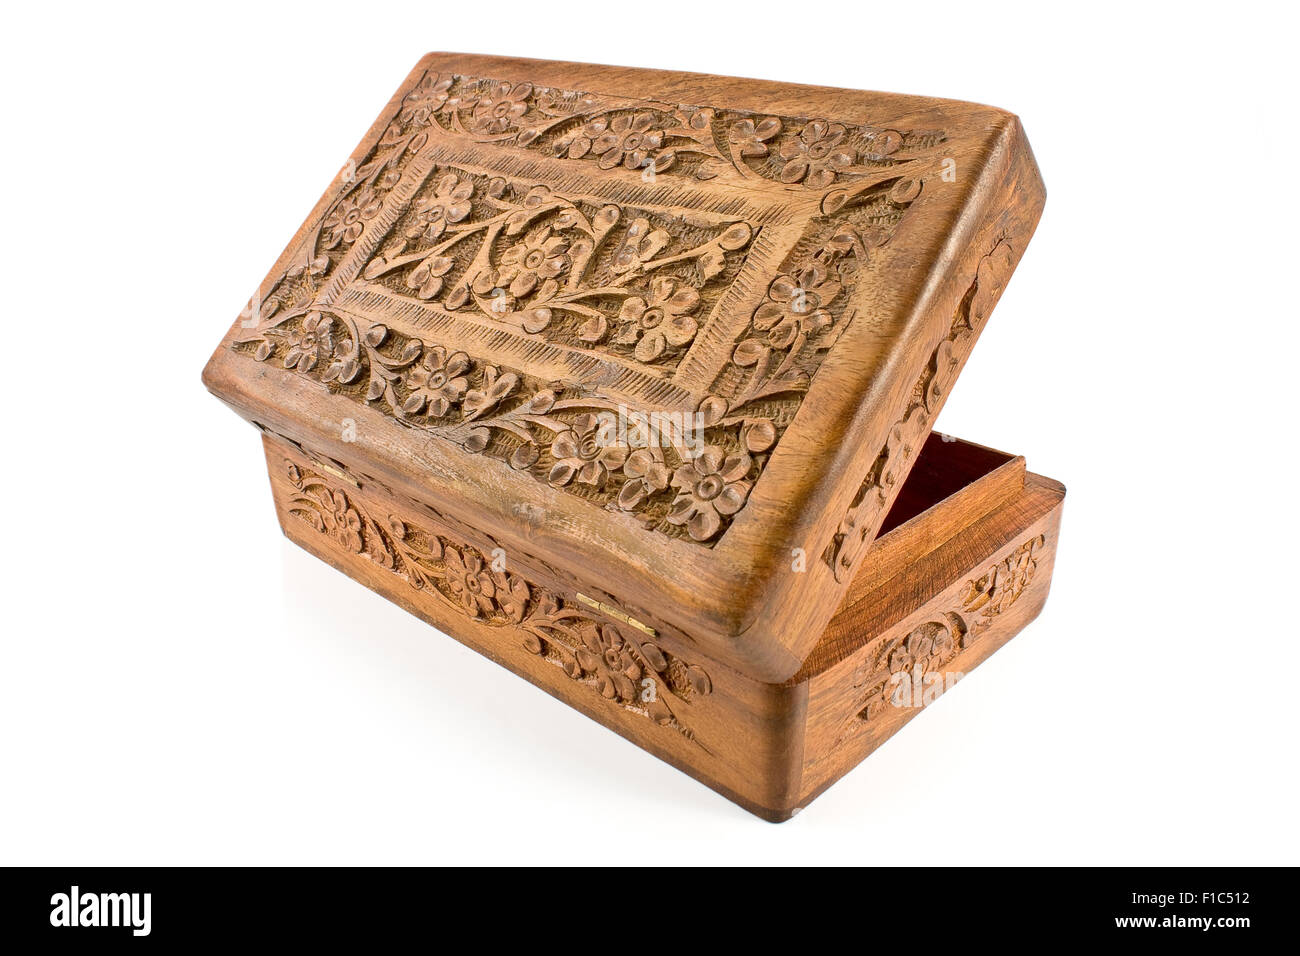 Open wooden casket with carved lid from India isolated on white Stock Photo